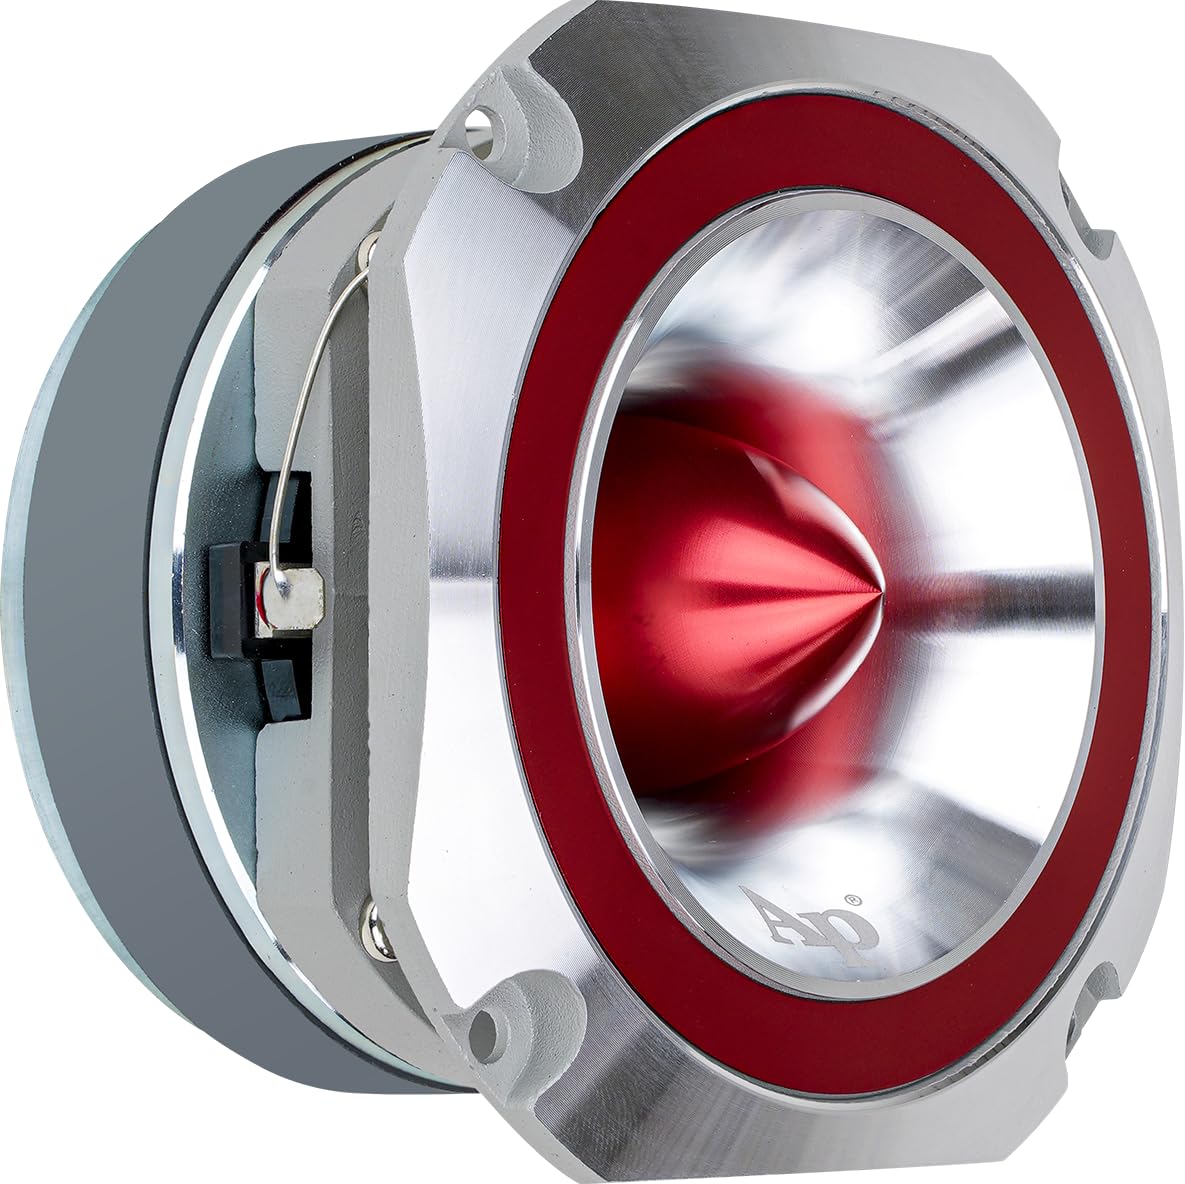 Audiopipe ATR4053RED 4" Aluminum Super Tweeter (Red) 400W Max (Sold Individually)